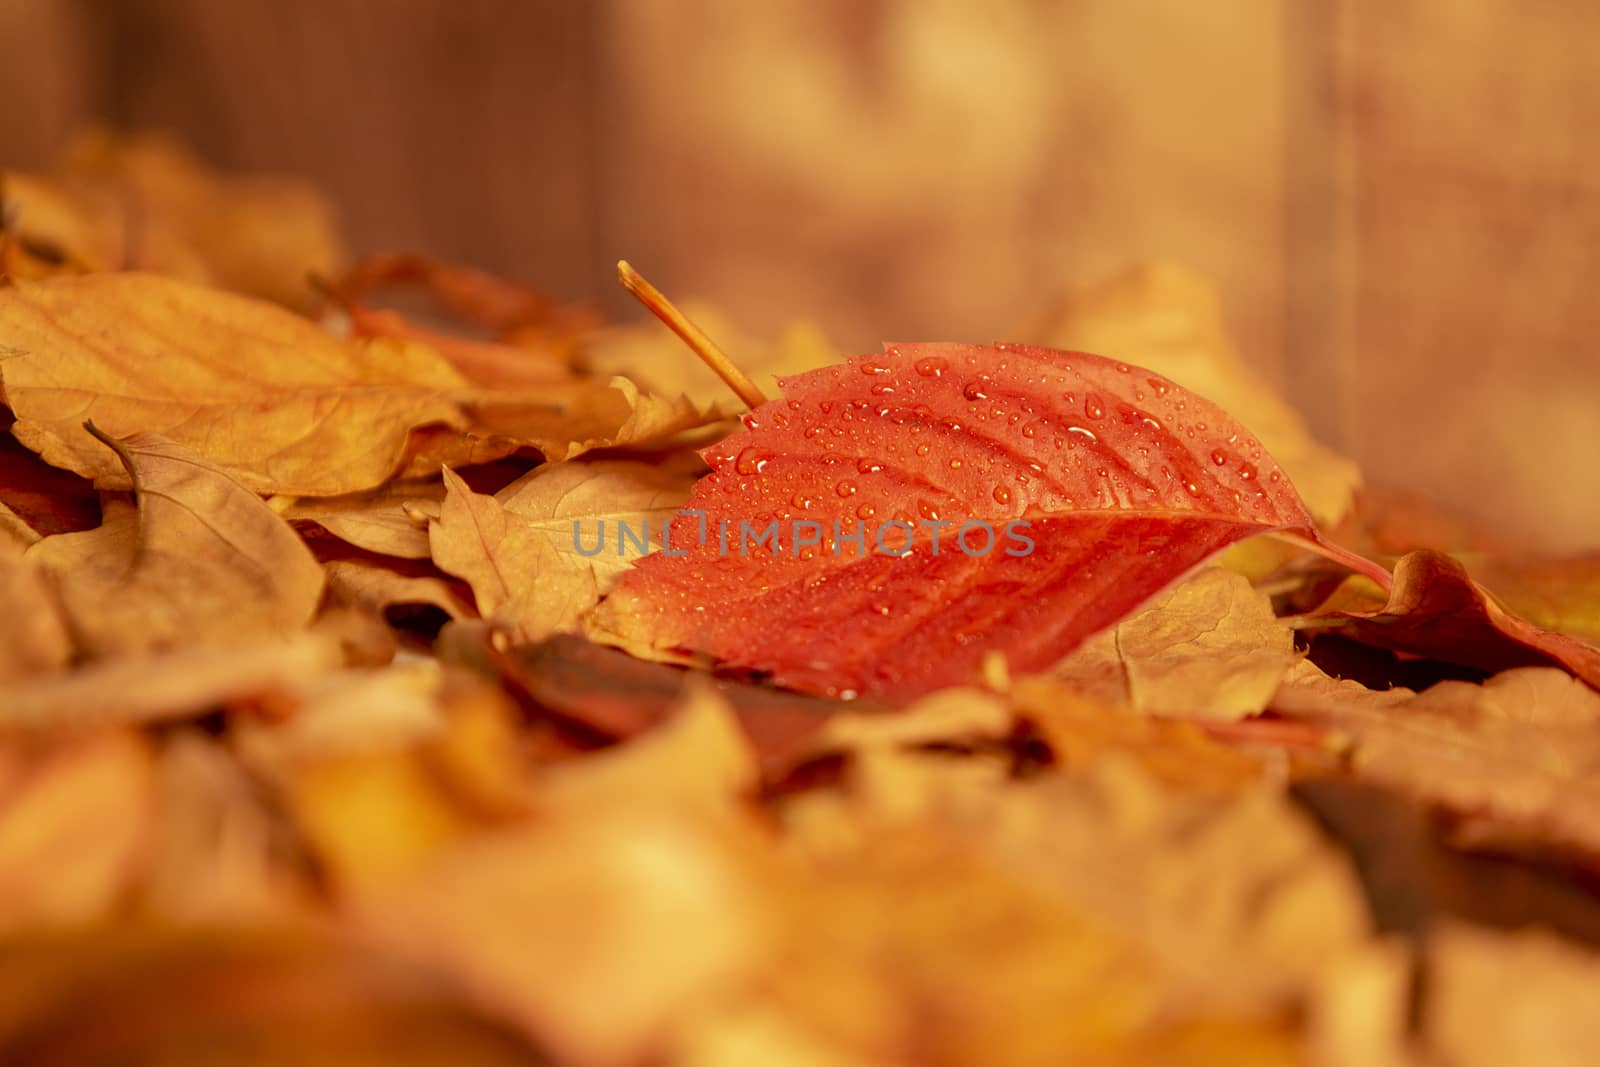 Autumn in orange: angle view close up of a red Virginia creeper (Parthenocissus quinquefolia) leaf on pile of dry leaves and wooden background